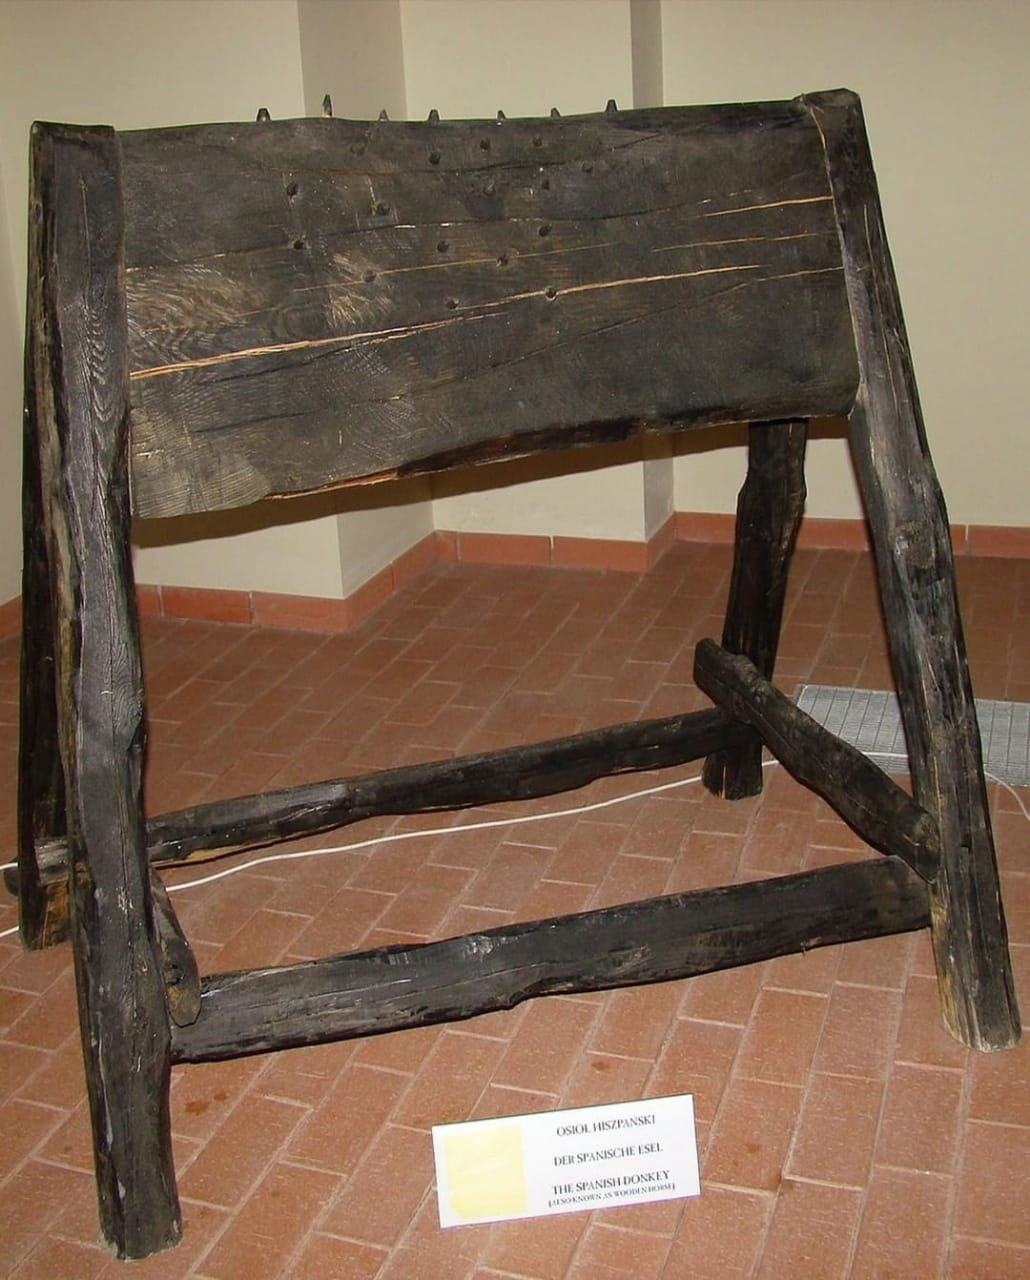 medieval era torture apparatus that was used in spain